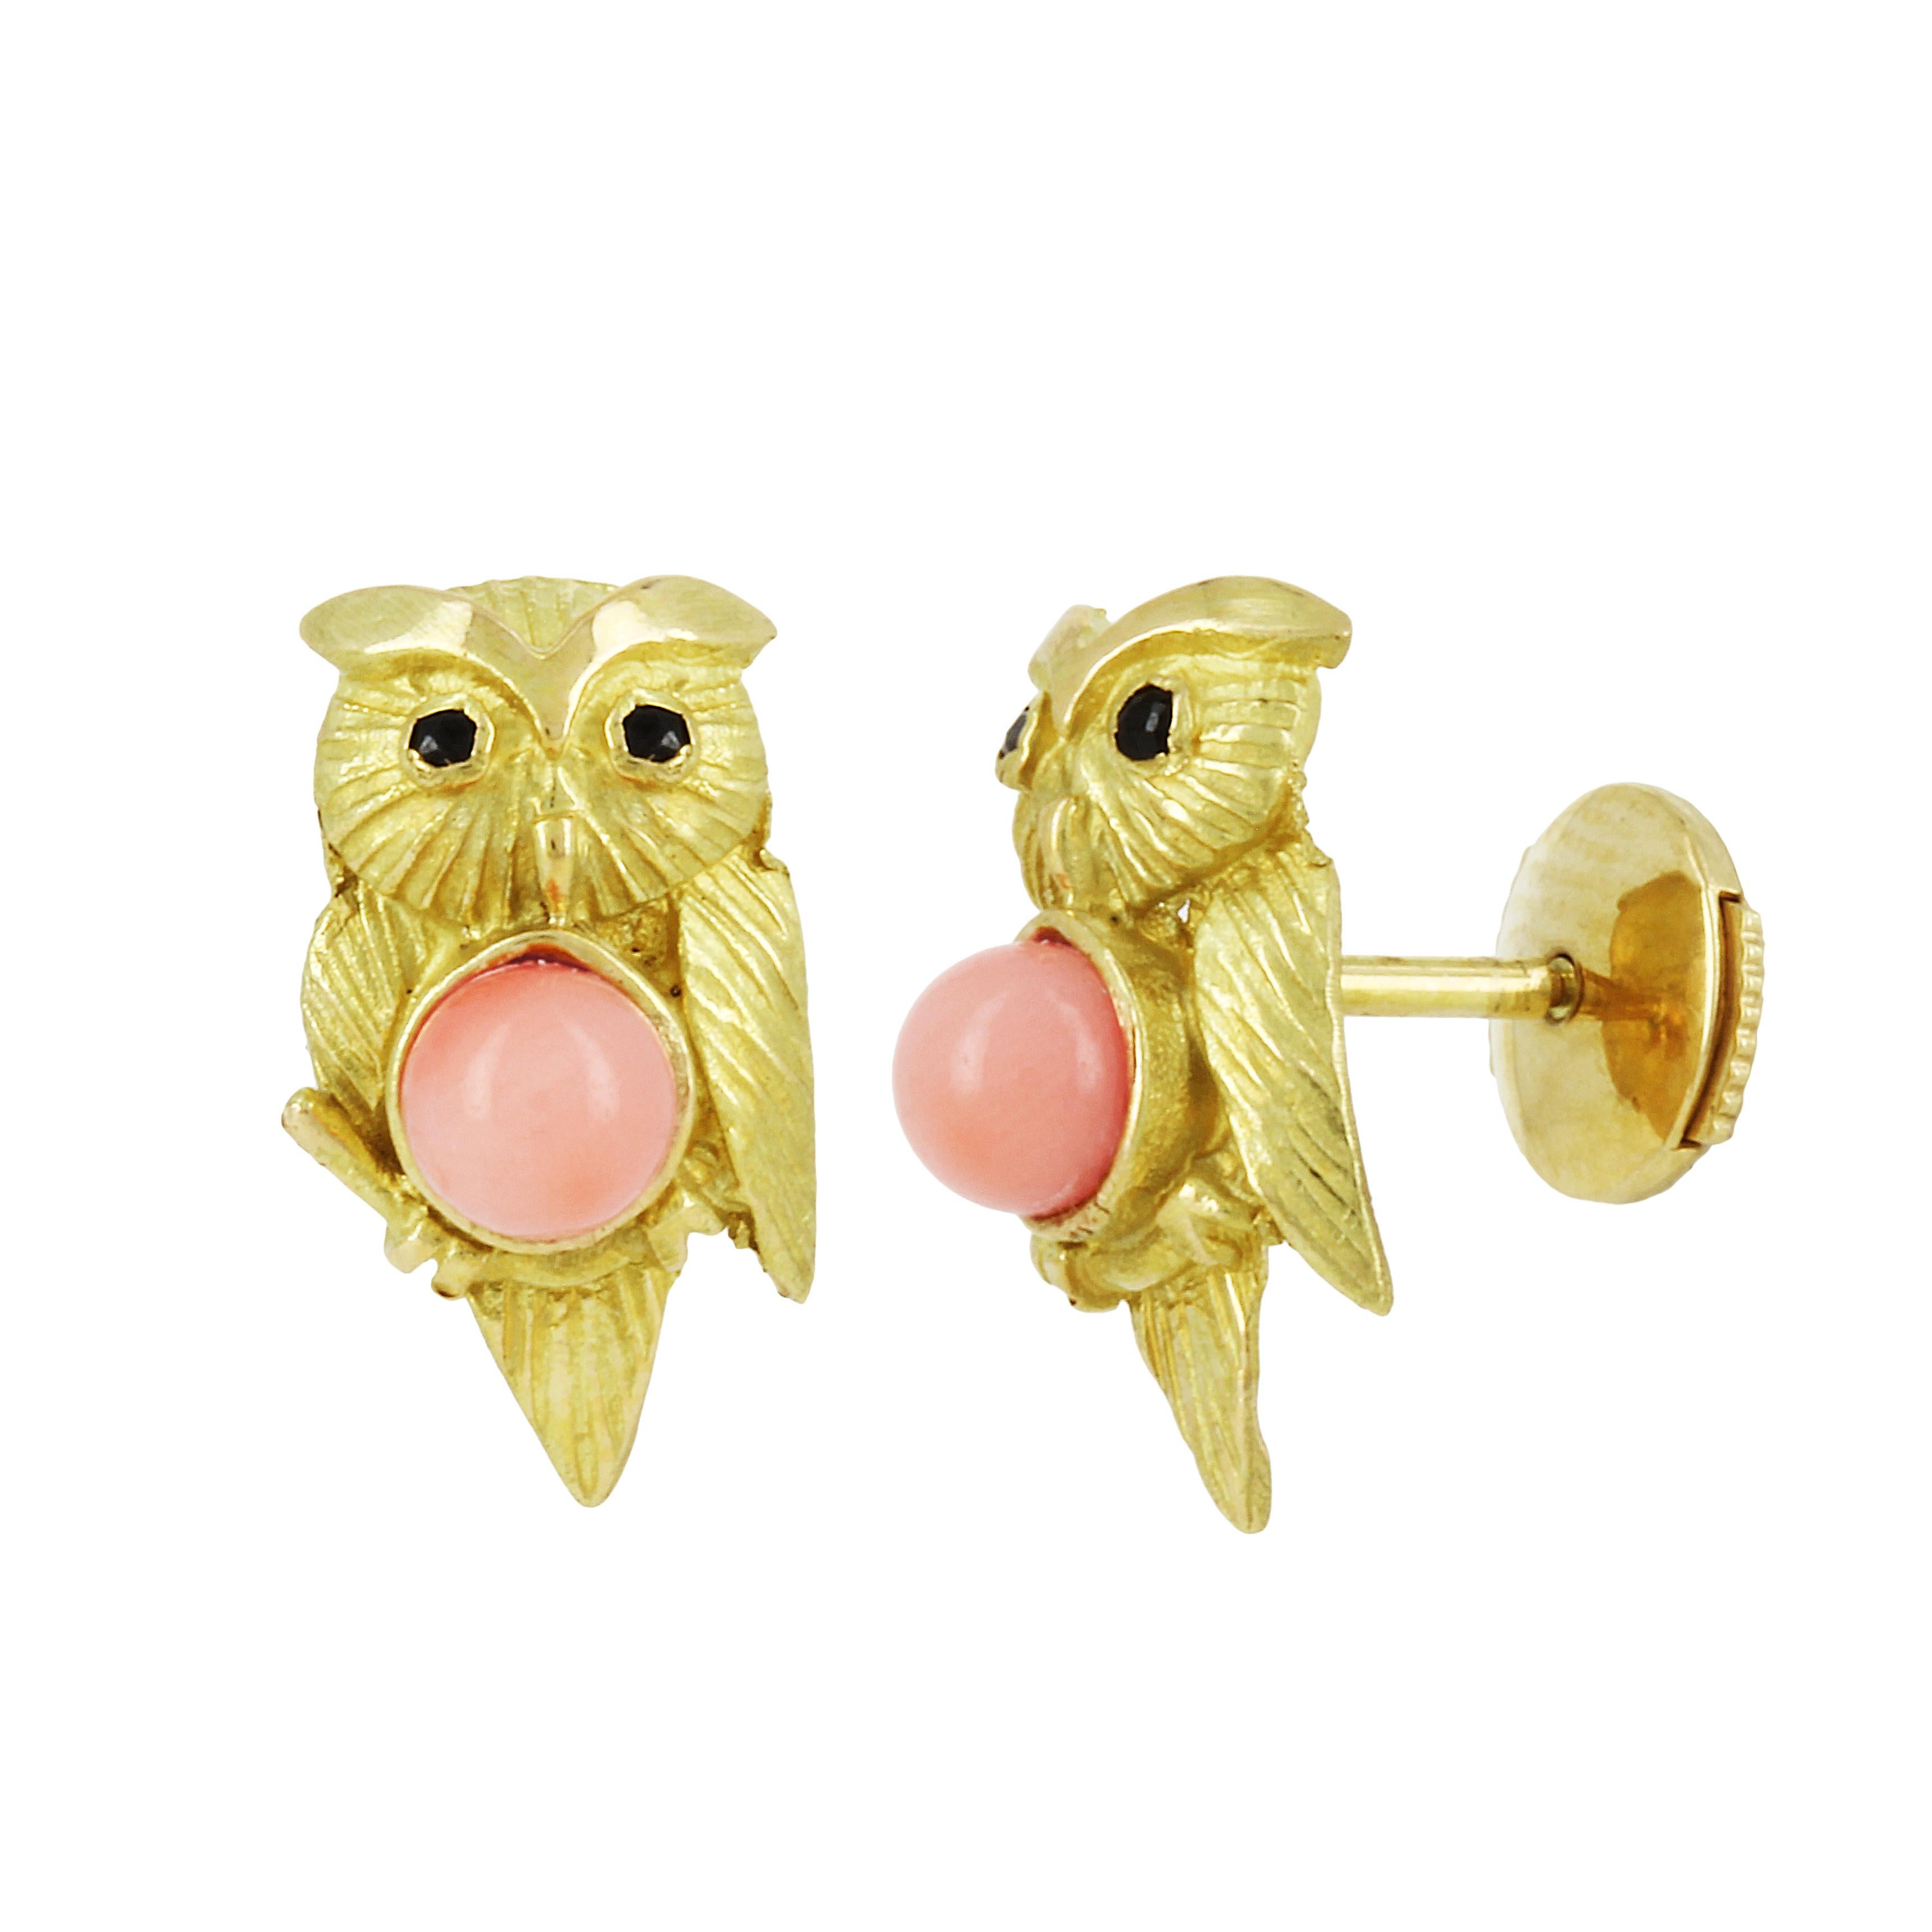 Round Cut Yvonne Leon's Pari of Owl Earrings Studs in Yellow Gold 18 Carat and Corals For Sale